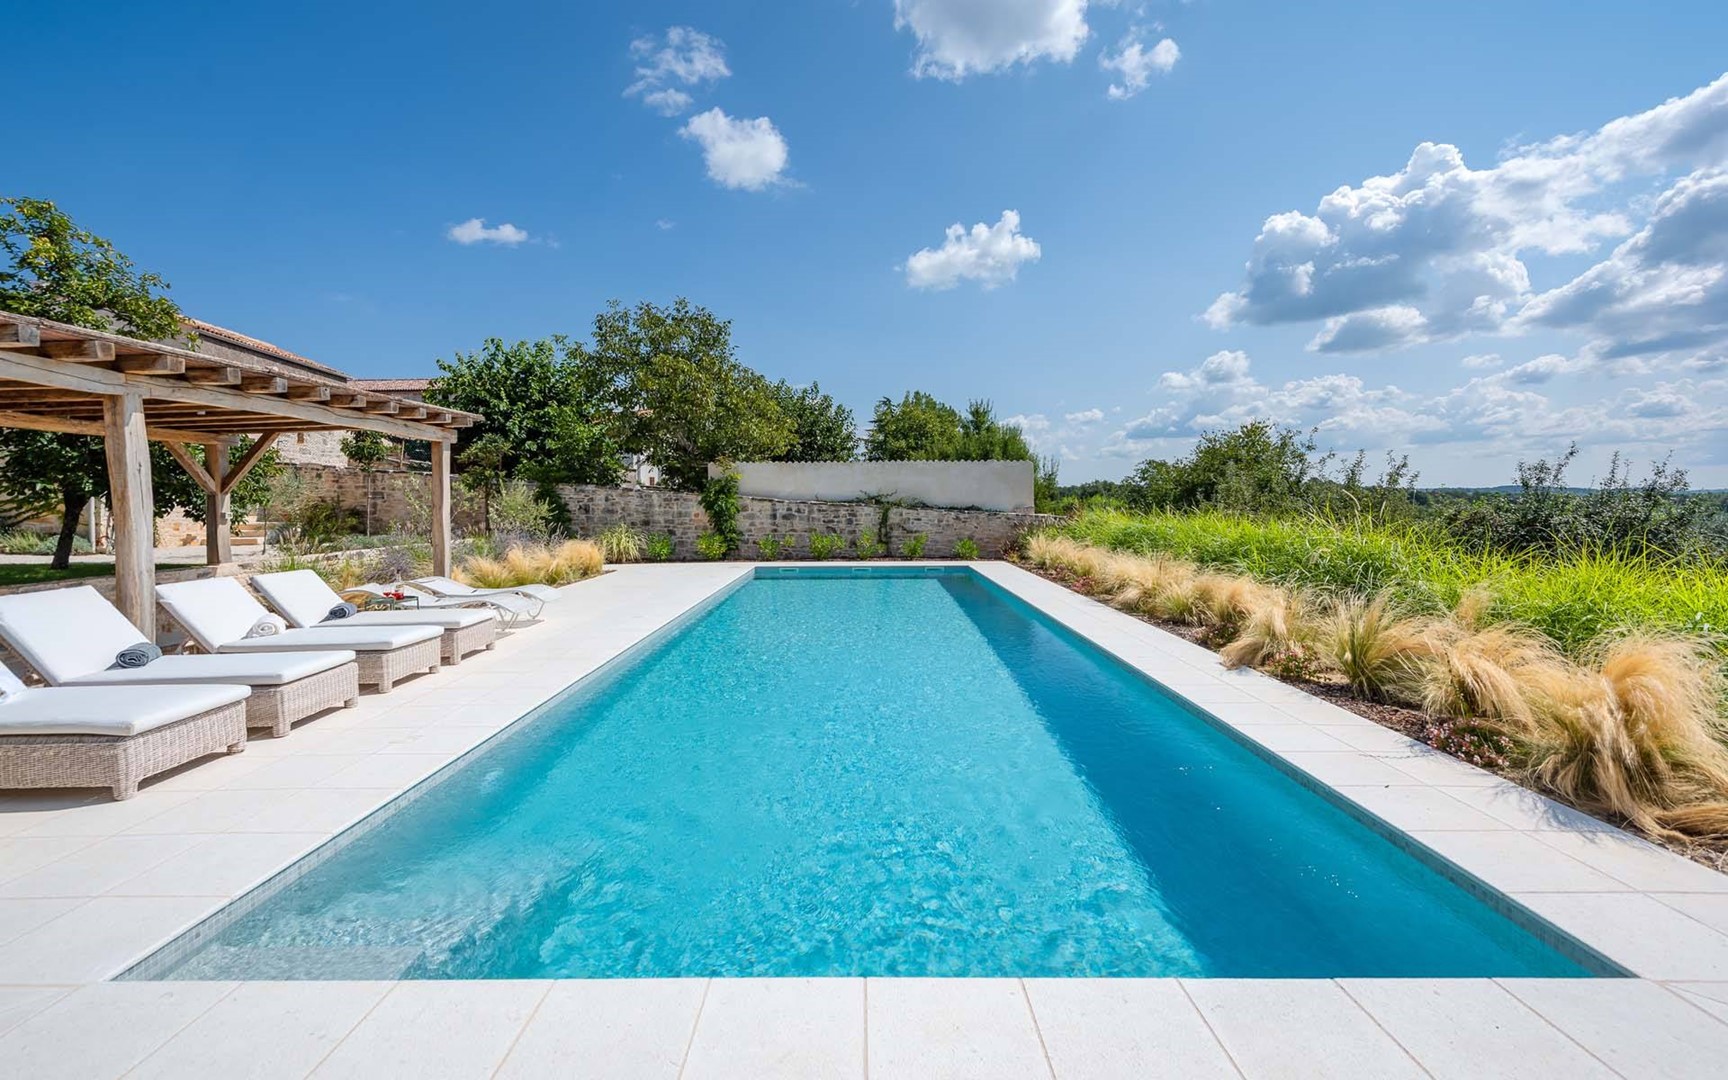 View of the pool surrounded by sun loungers on a paved terrace in the private garden full of greenery in front of the luxury villa Deluxe Manor Baderna in Istria